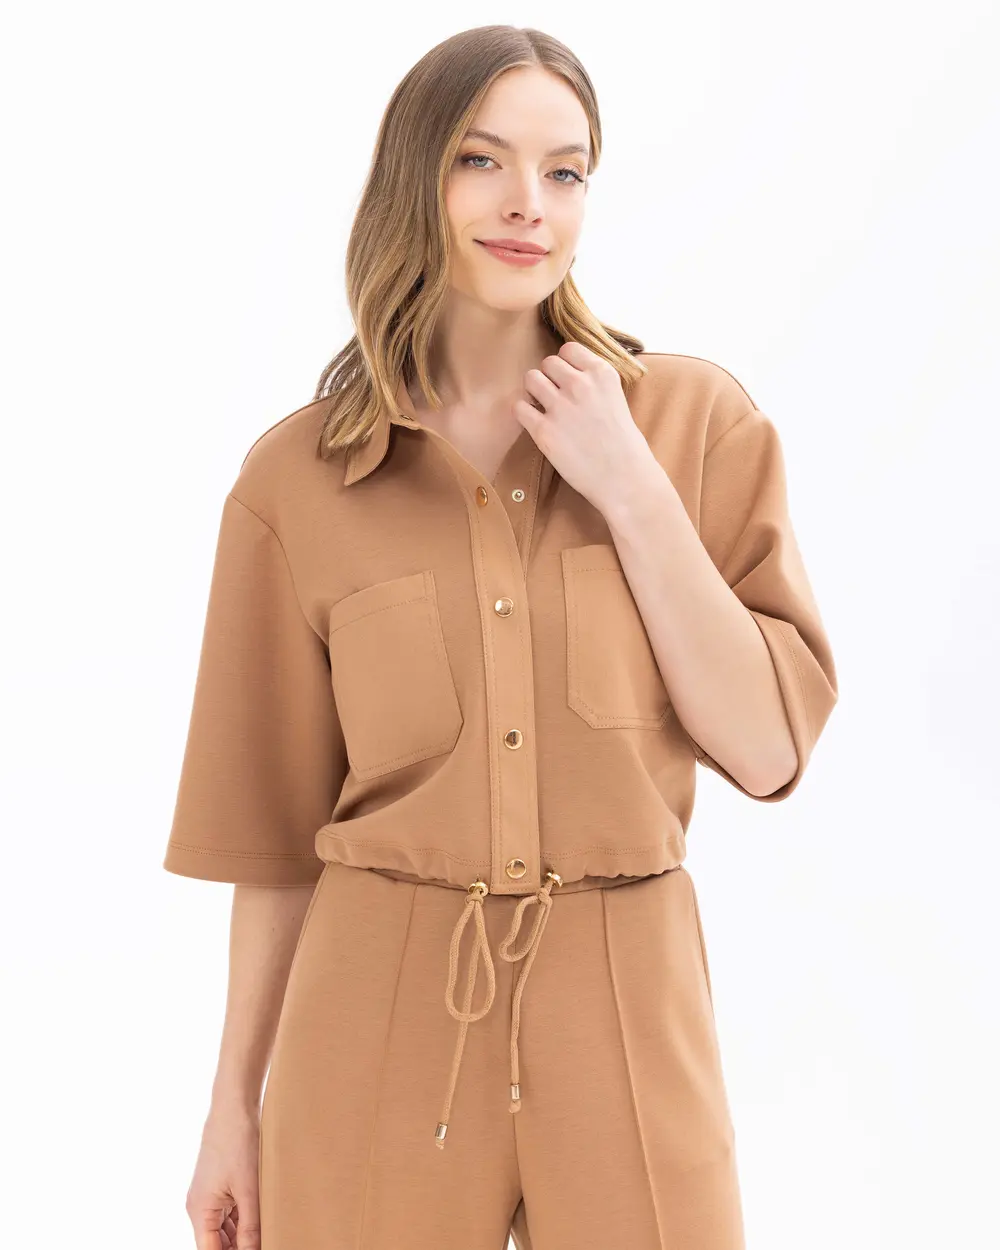 Short Sleeve Waist Length Jacket with Snap Buttons